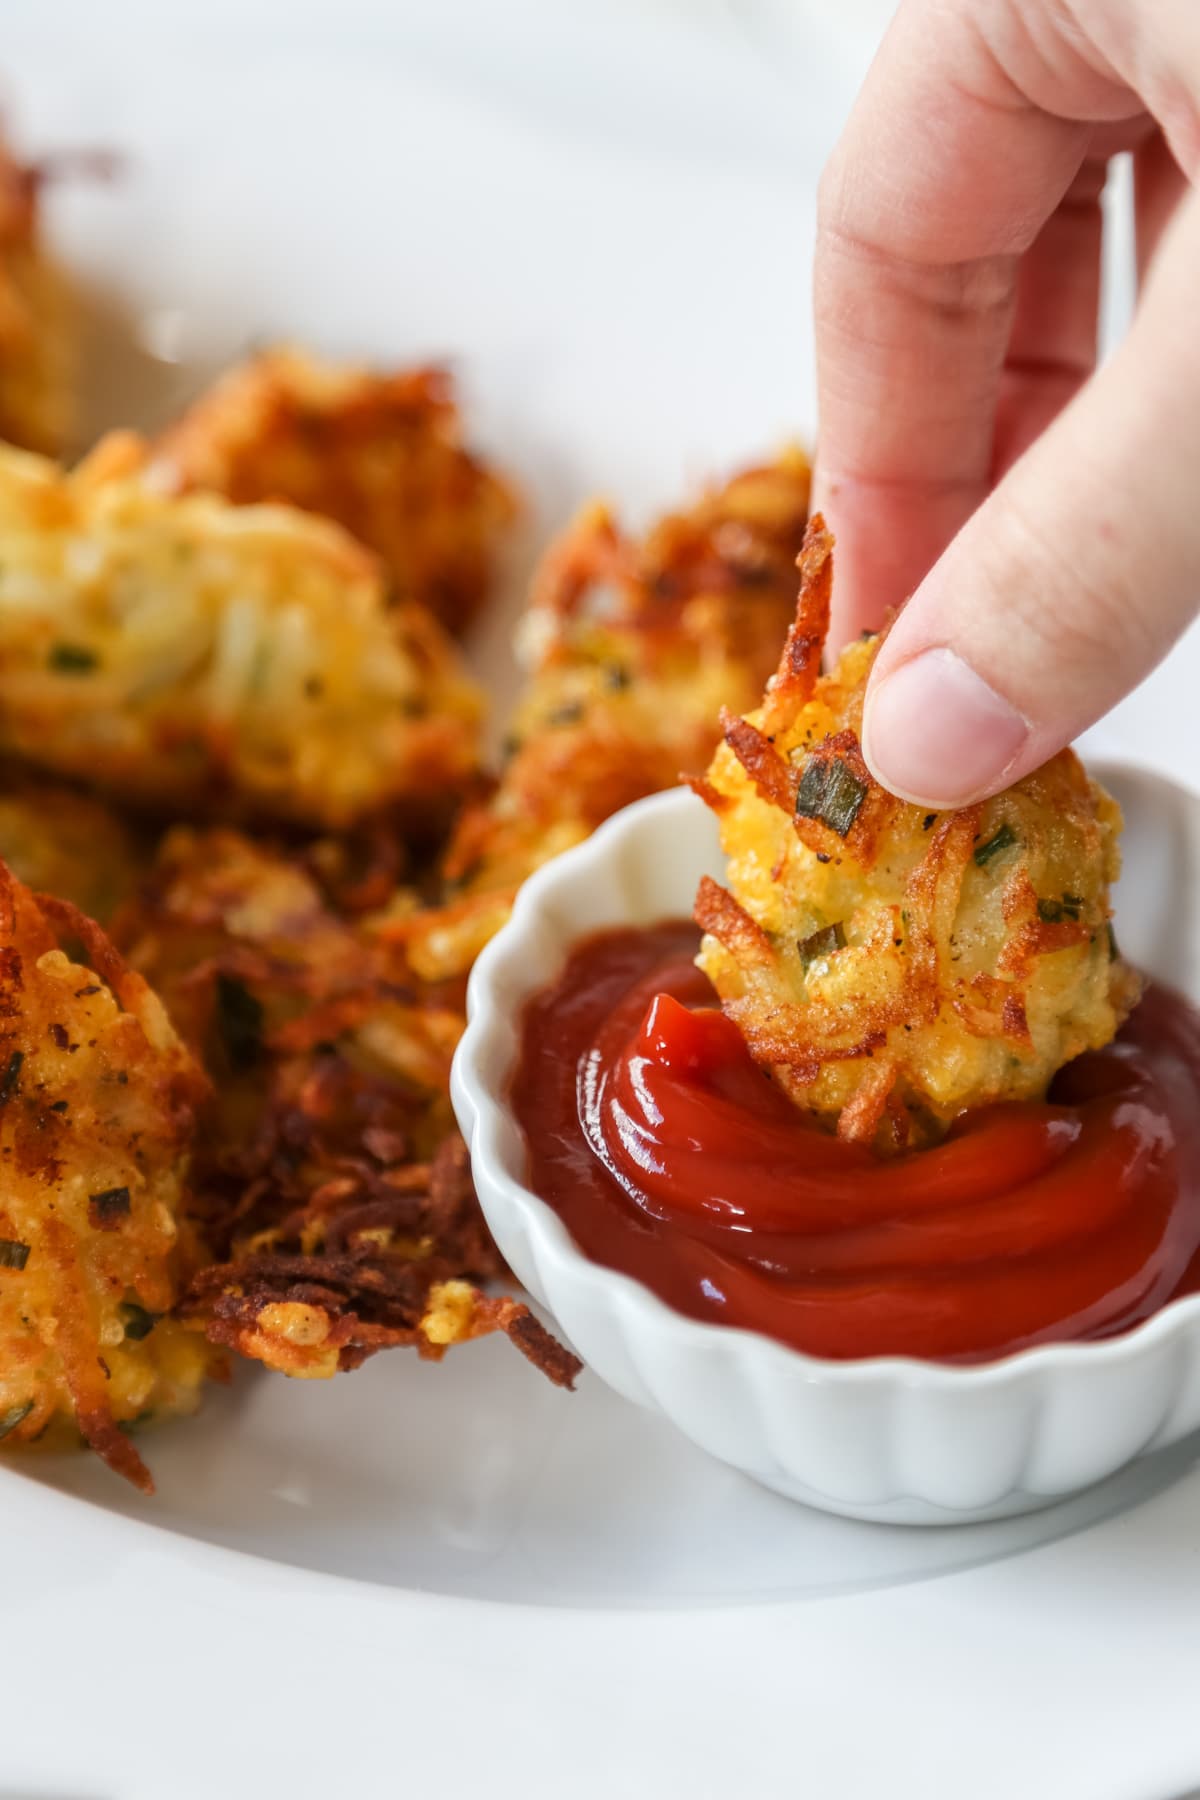 A hand dipping a tater tot into a bowl of ketchup that's on a white platter filled with tots.